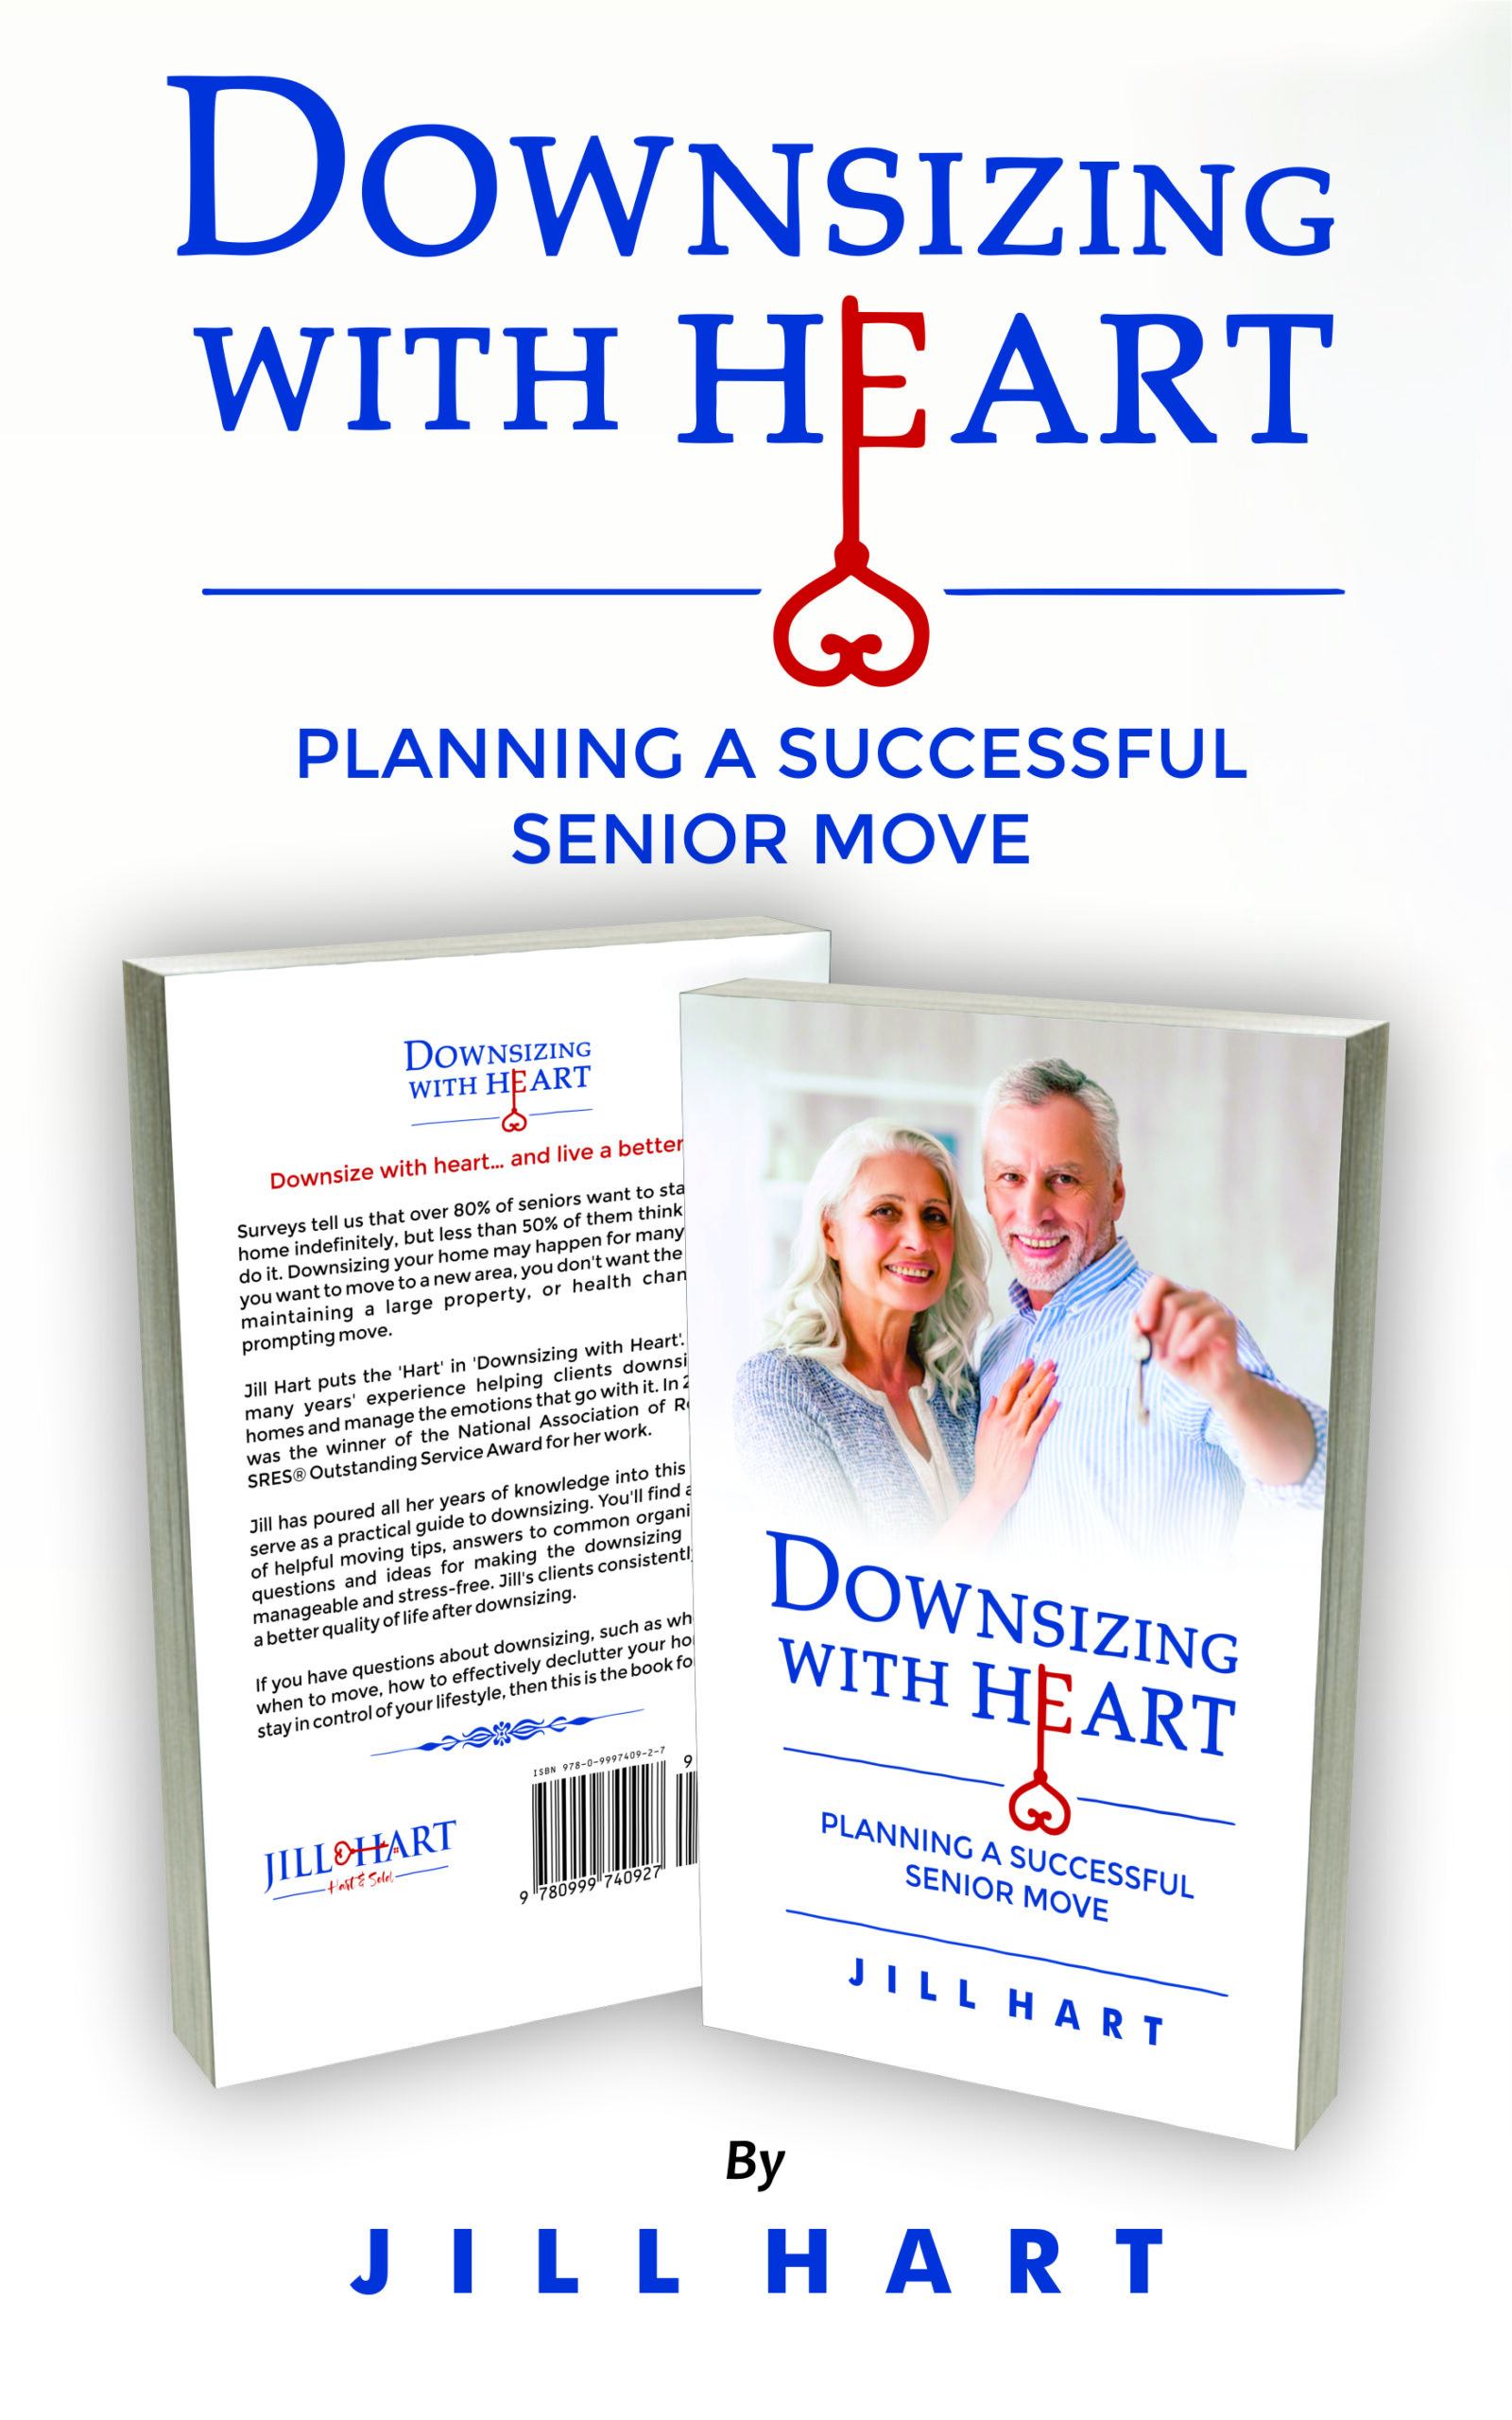 Downsizing with Heart